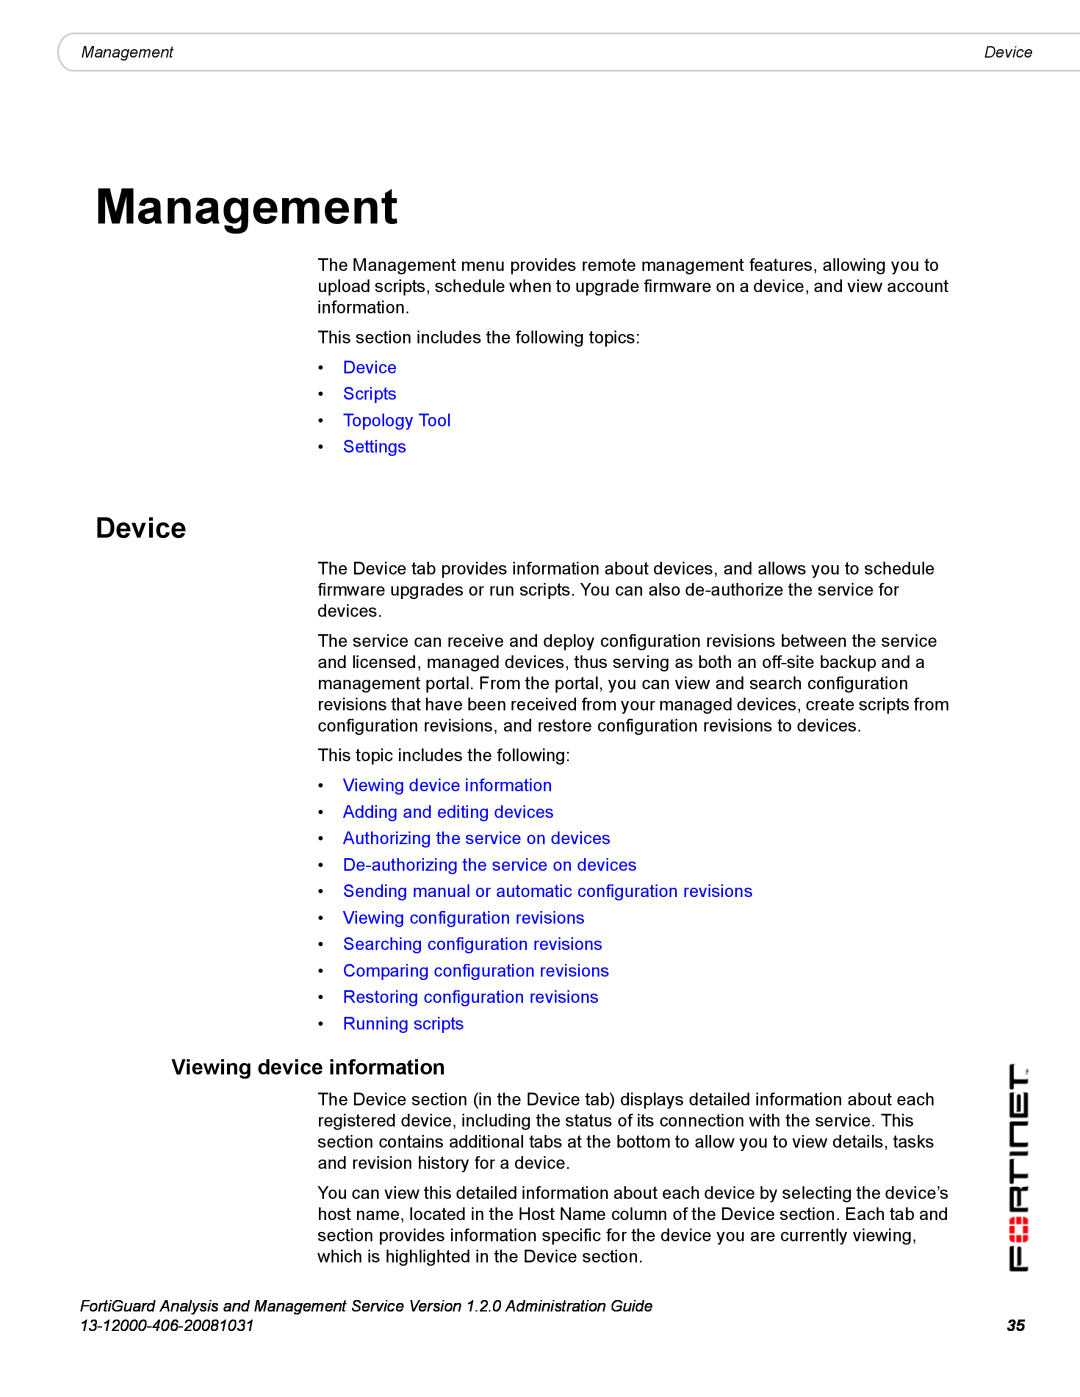 Fortinet 1.2.0 manual Management, Viewing device information, Device Scripts Topology Tool Settings, Running scripts 